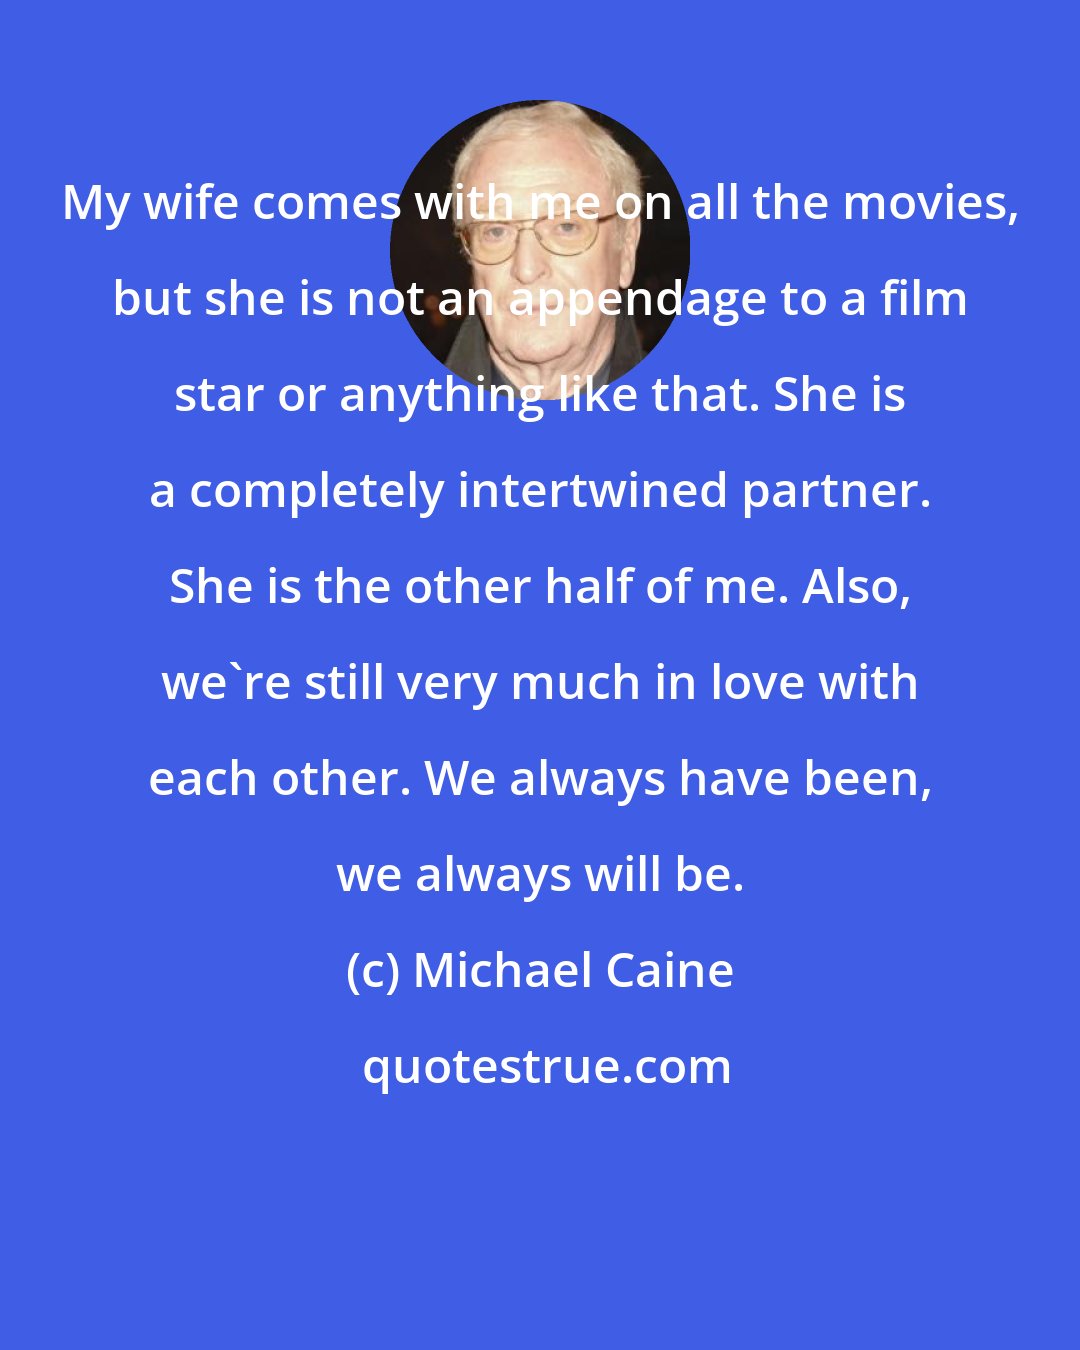 Michael Caine: My wife comes with me on all the movies, but she is not an appendage to a film star or anything like that. She is a completely intertwined partner. She is the other half of me. Also, we're still very much in love with each other. We always have been, we always will be.